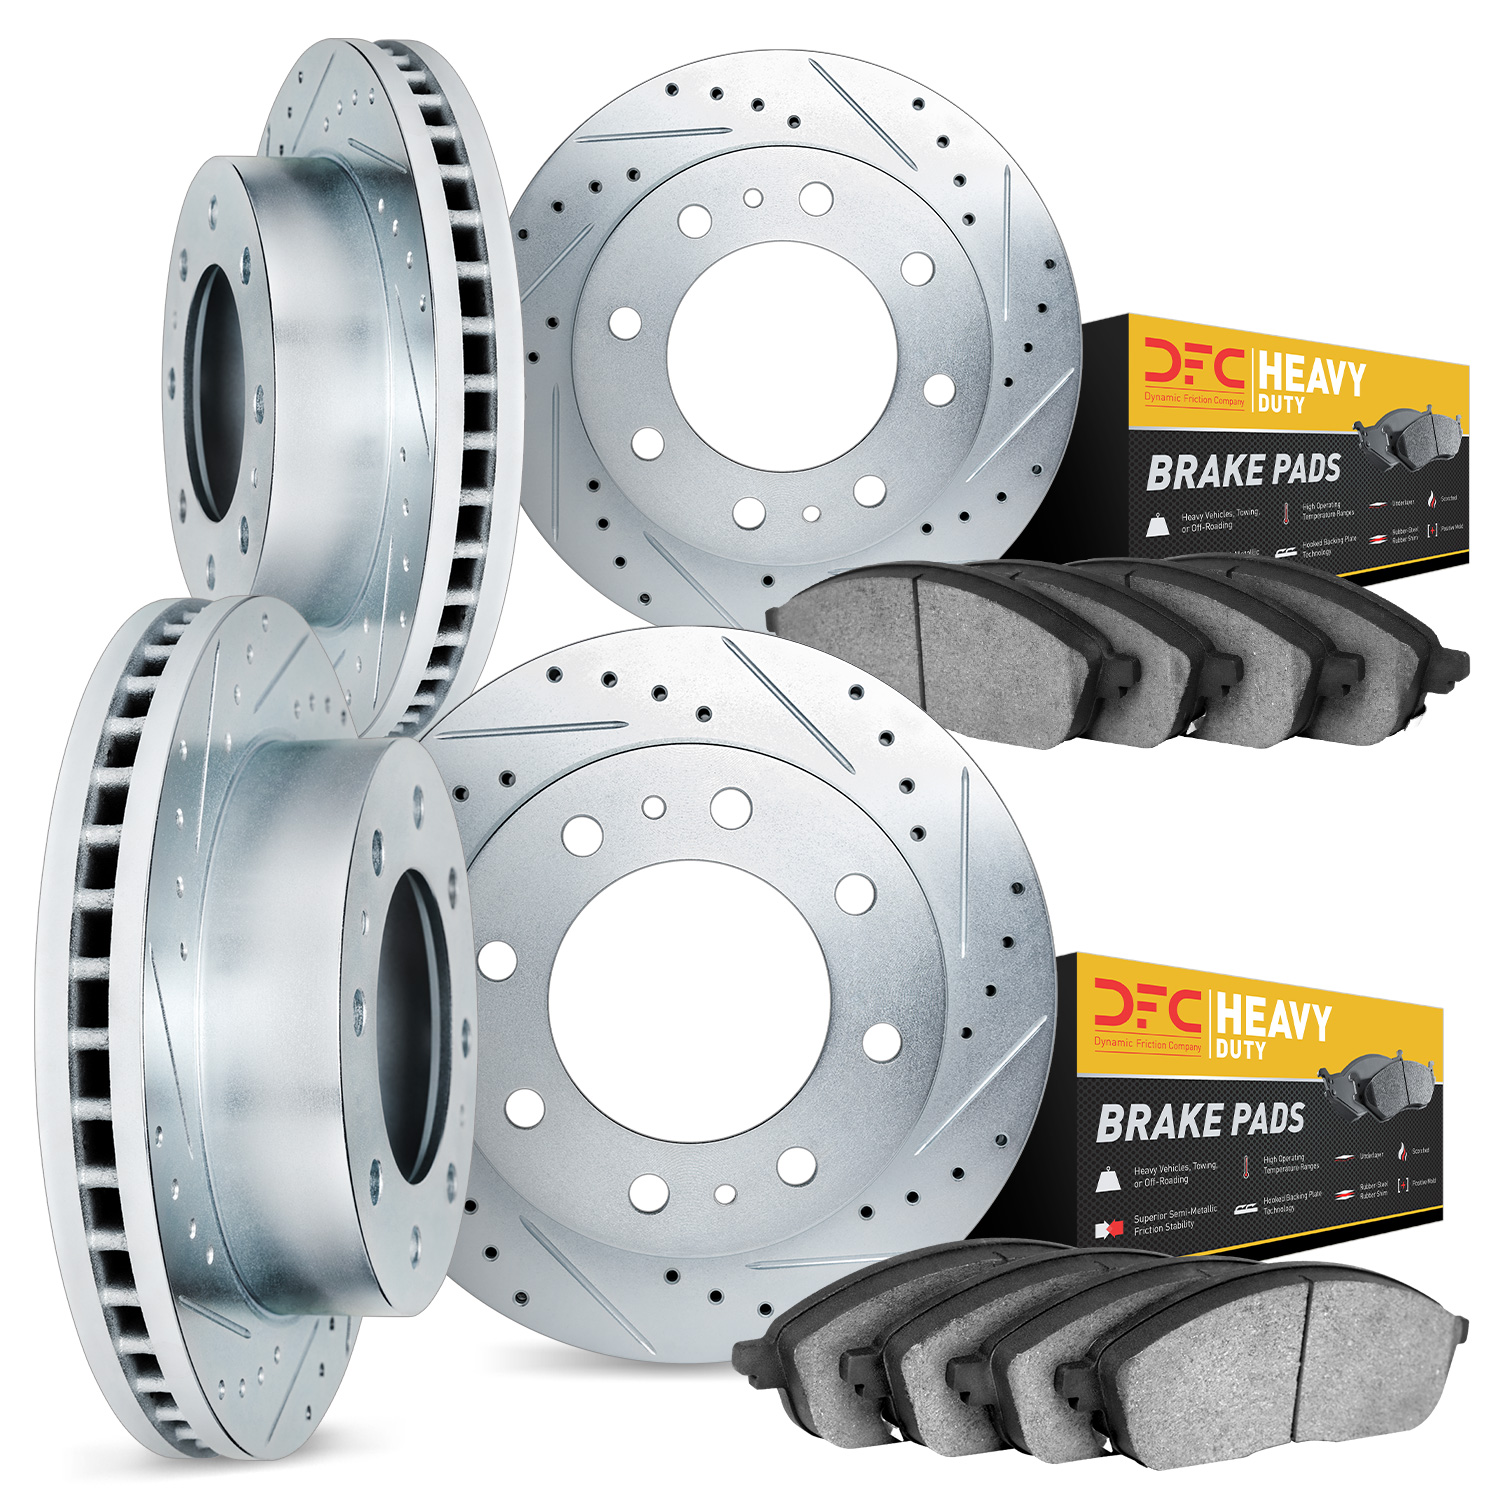 7204-48134 Drilled/Slotted Rotors w/Heavy-Duty Brake Pads Kit [Silver], 1999-2013 GM, Position: Front and Rear